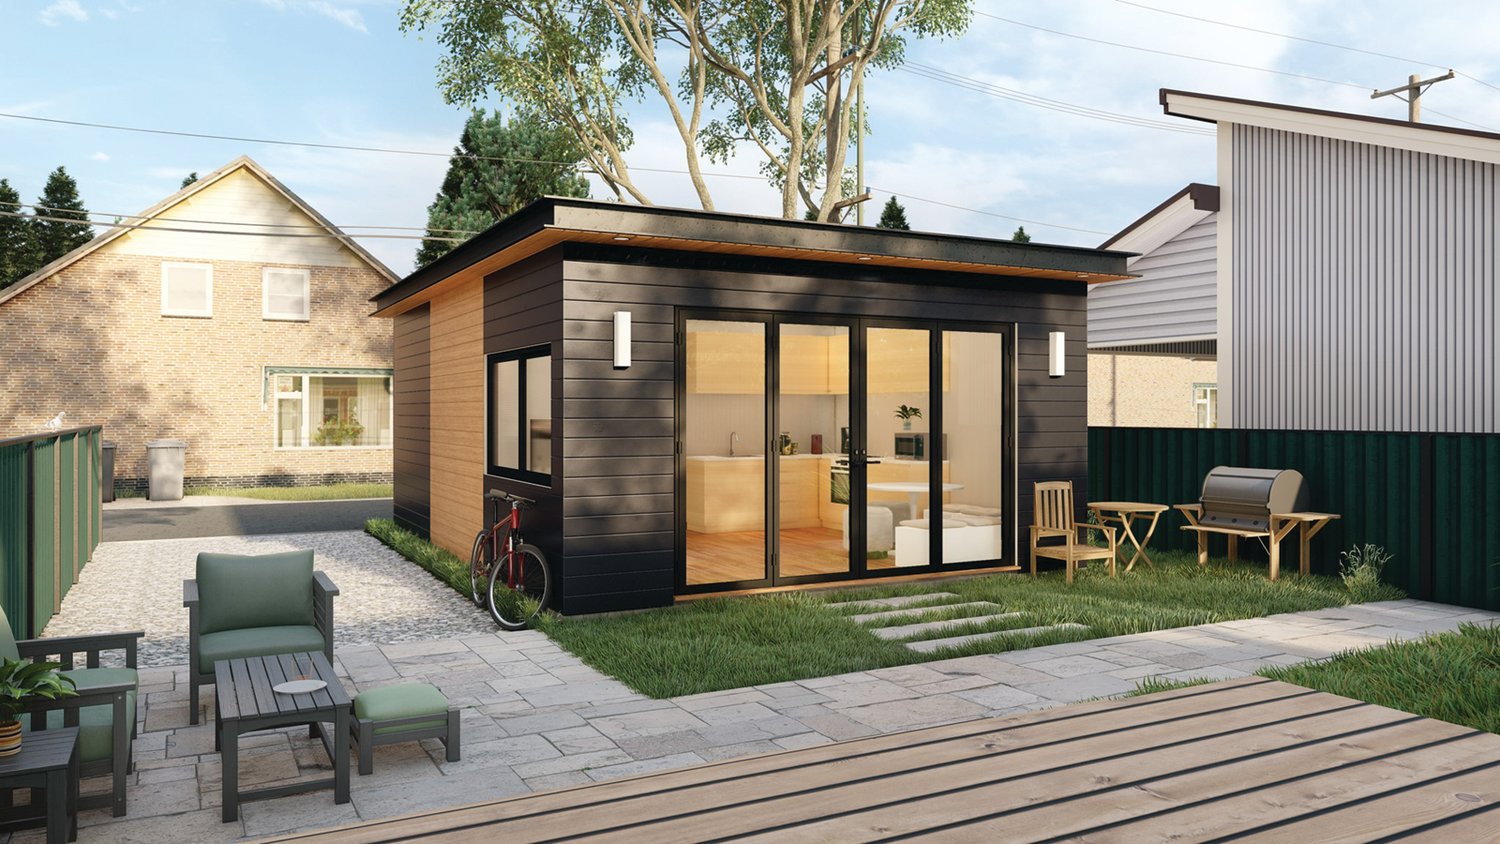 SQAURE FEET: A Rohe Lotus tiny home prototype sits on the company’s property in British Columbia, Canada.